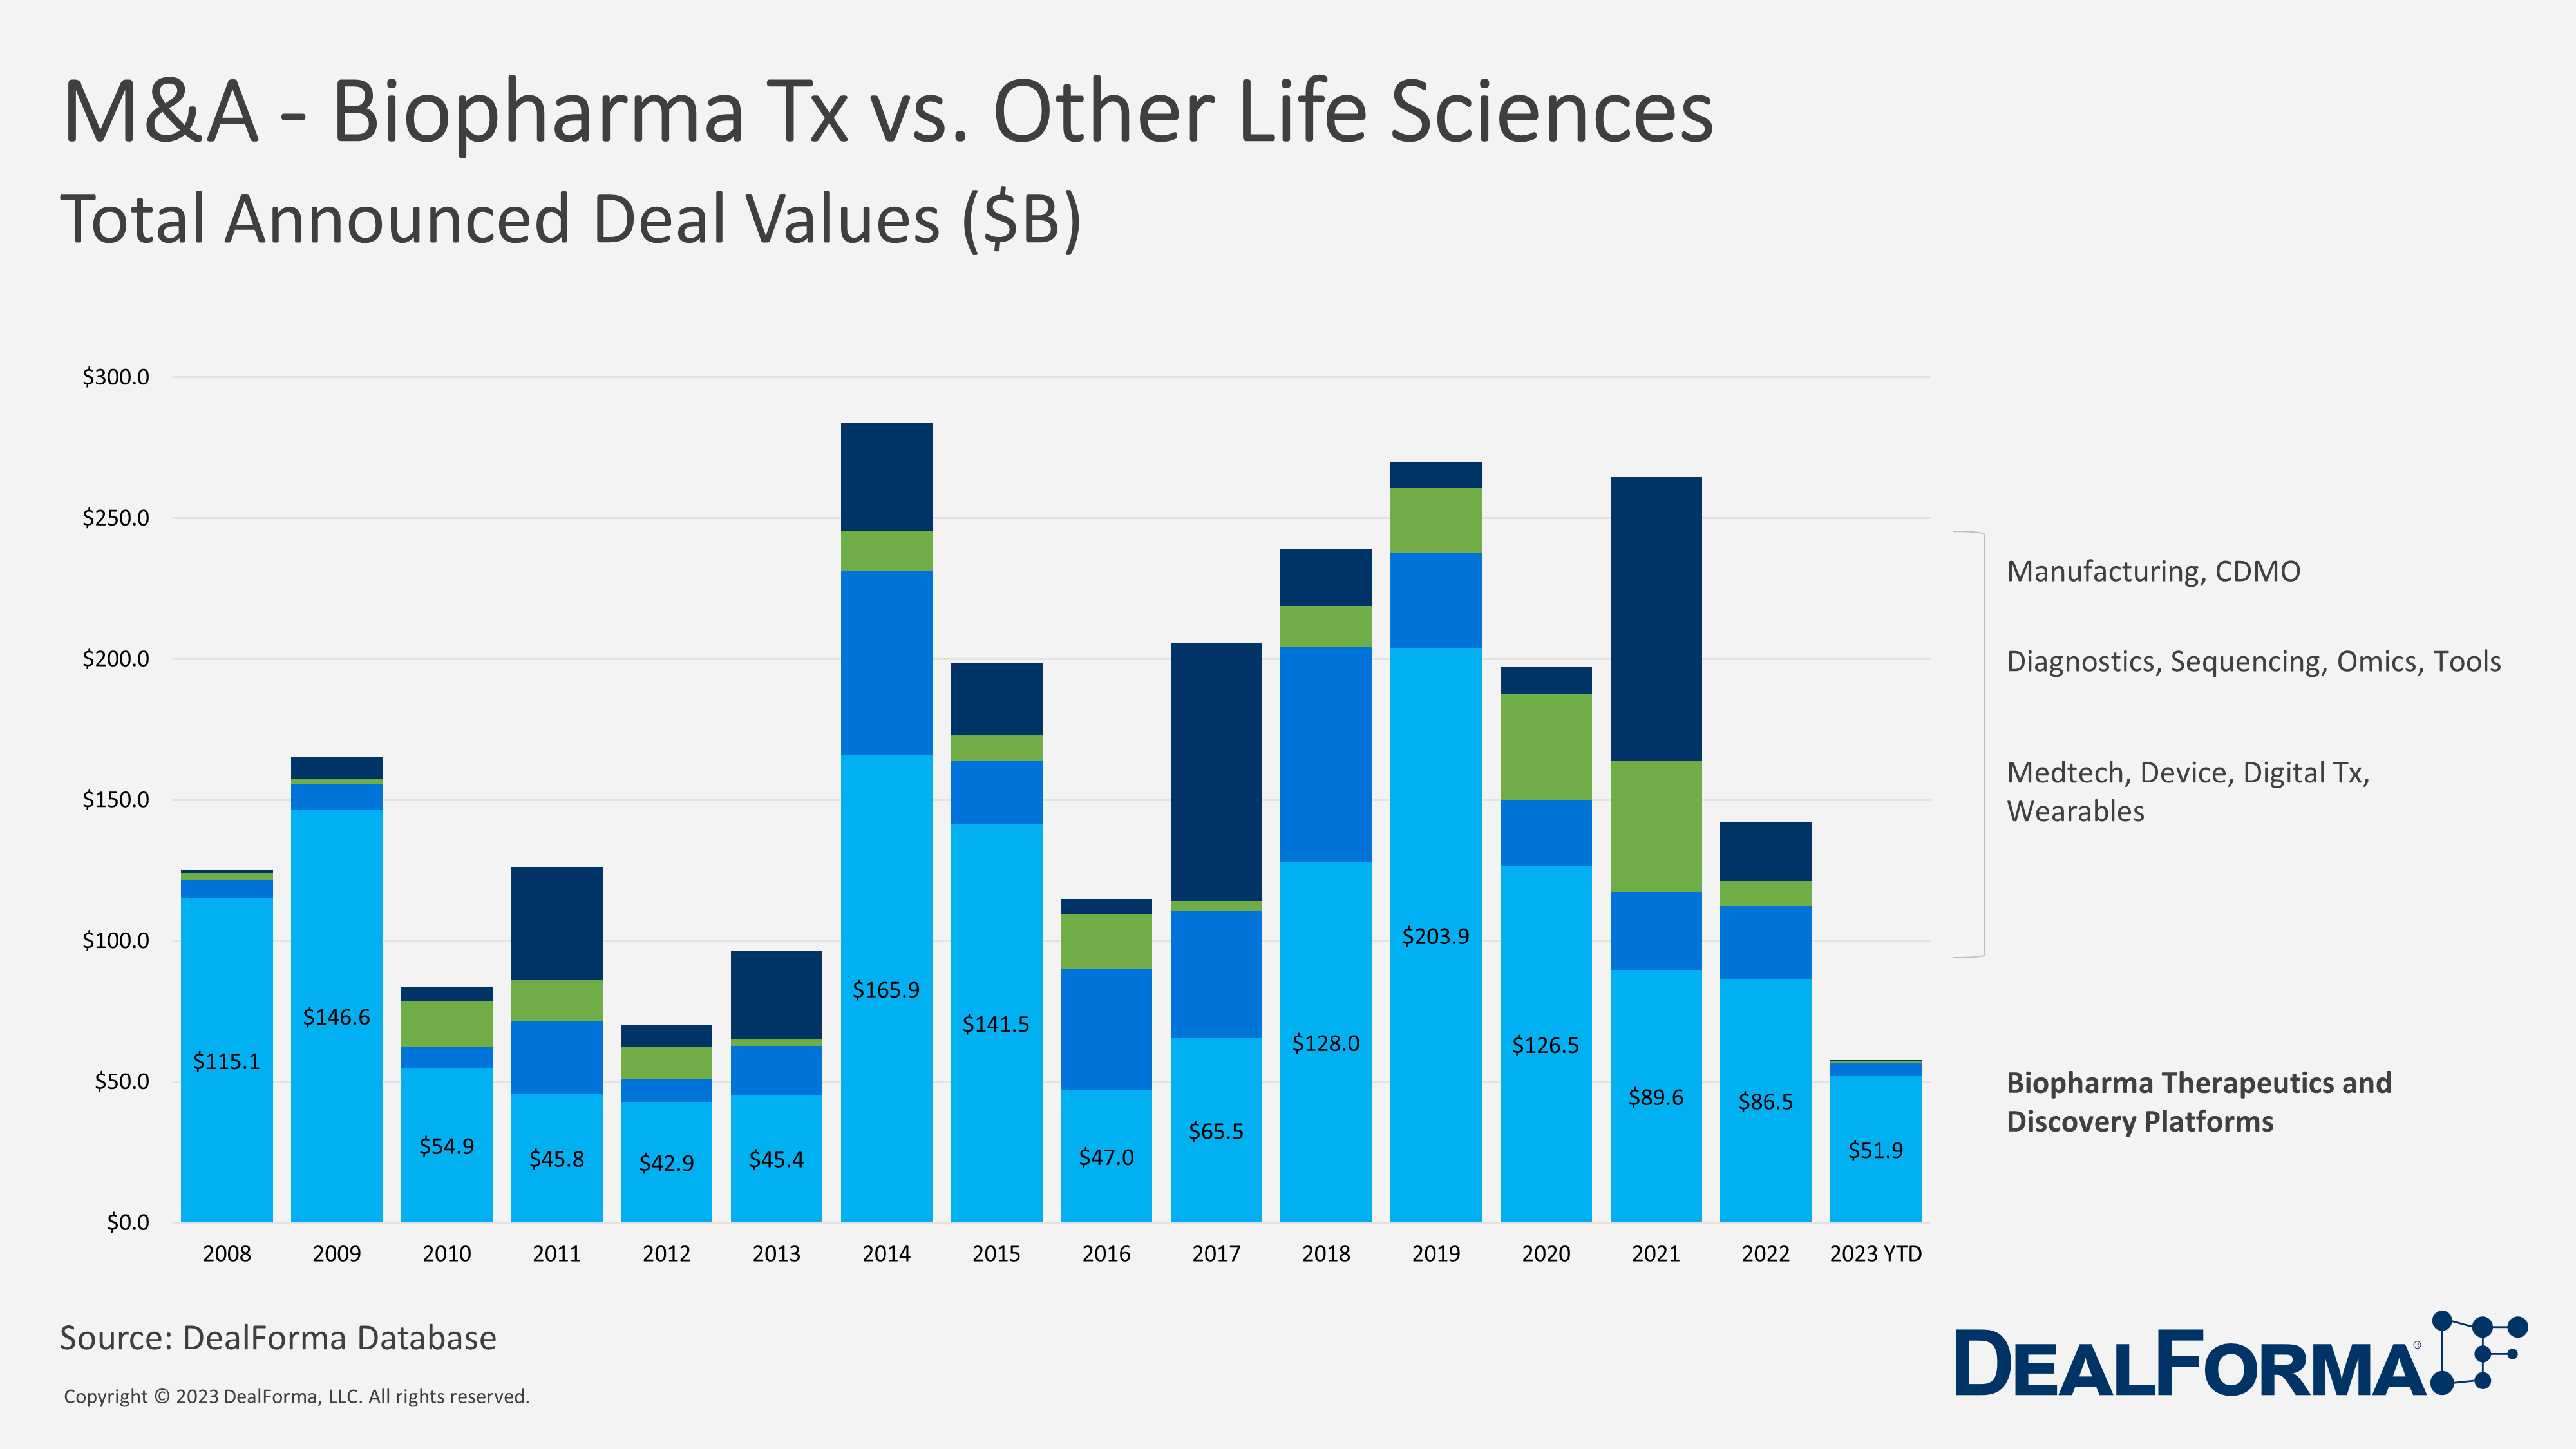 M&A - Biopharma Tx vs. Other Life Sciences. Total Announced Deal Value ($B)